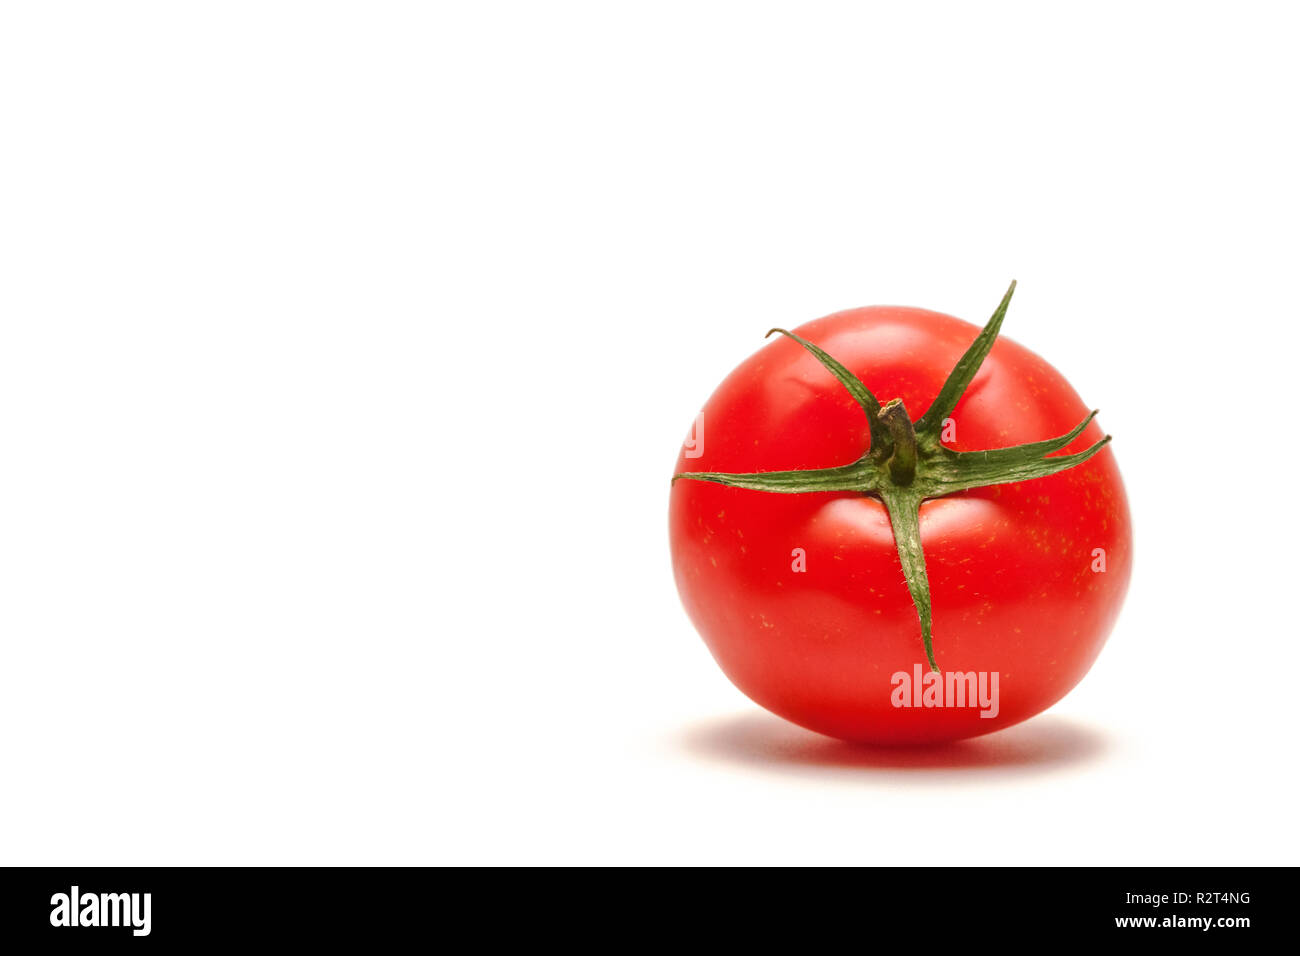 Whole Red Tomato Isolated On White Background. Organic Food. Cooking Ingredients. Pomodoro Timer. Stock Photo